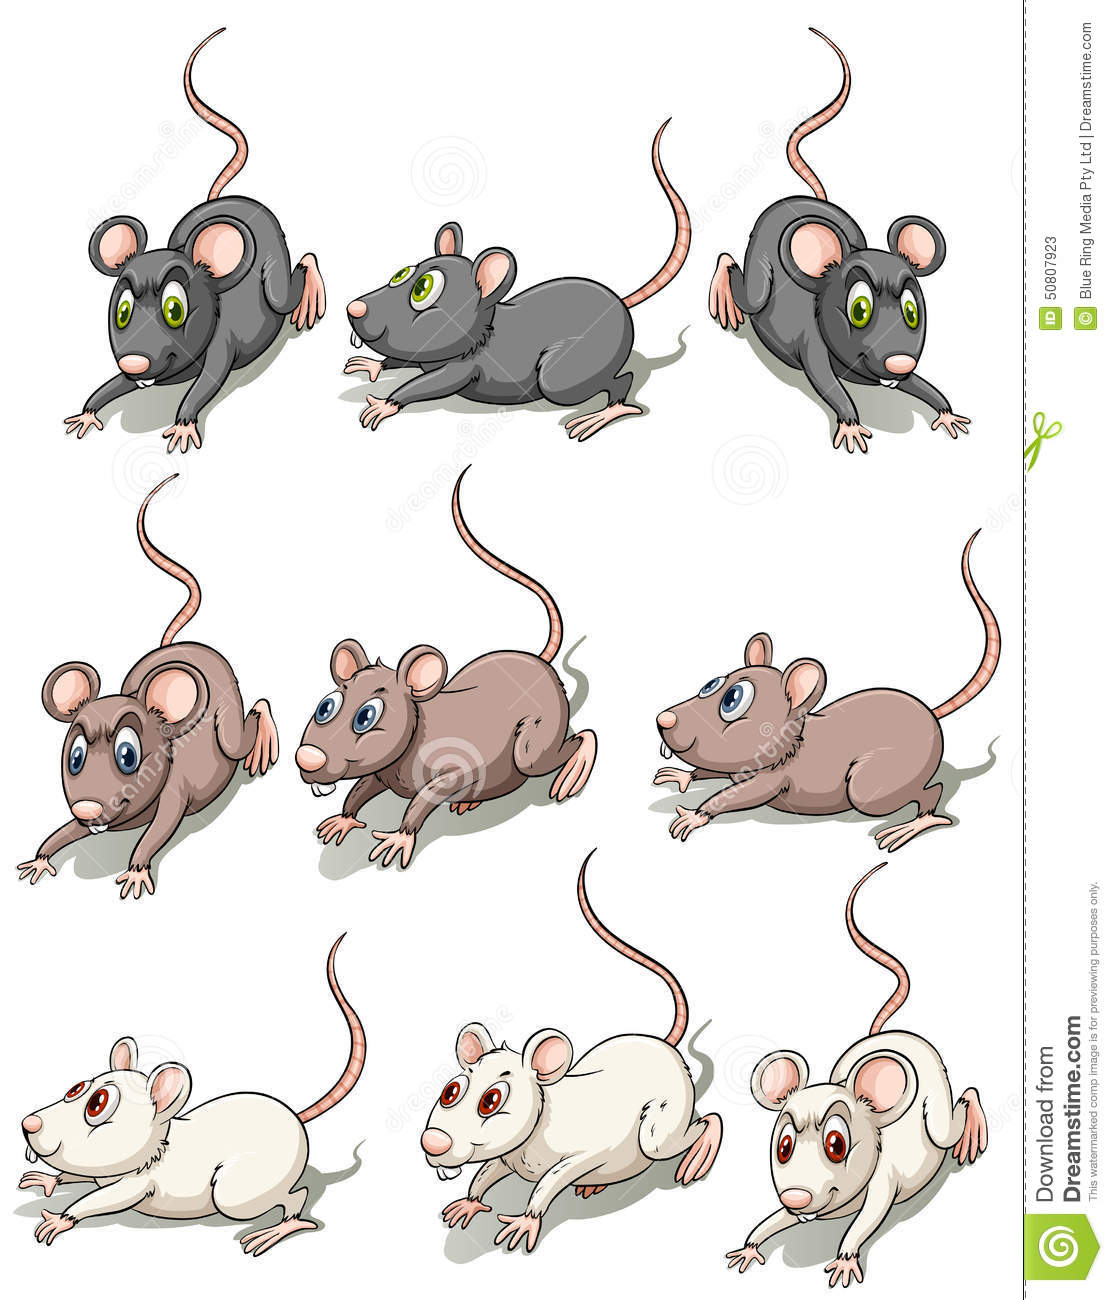 701 Mice free clipart.